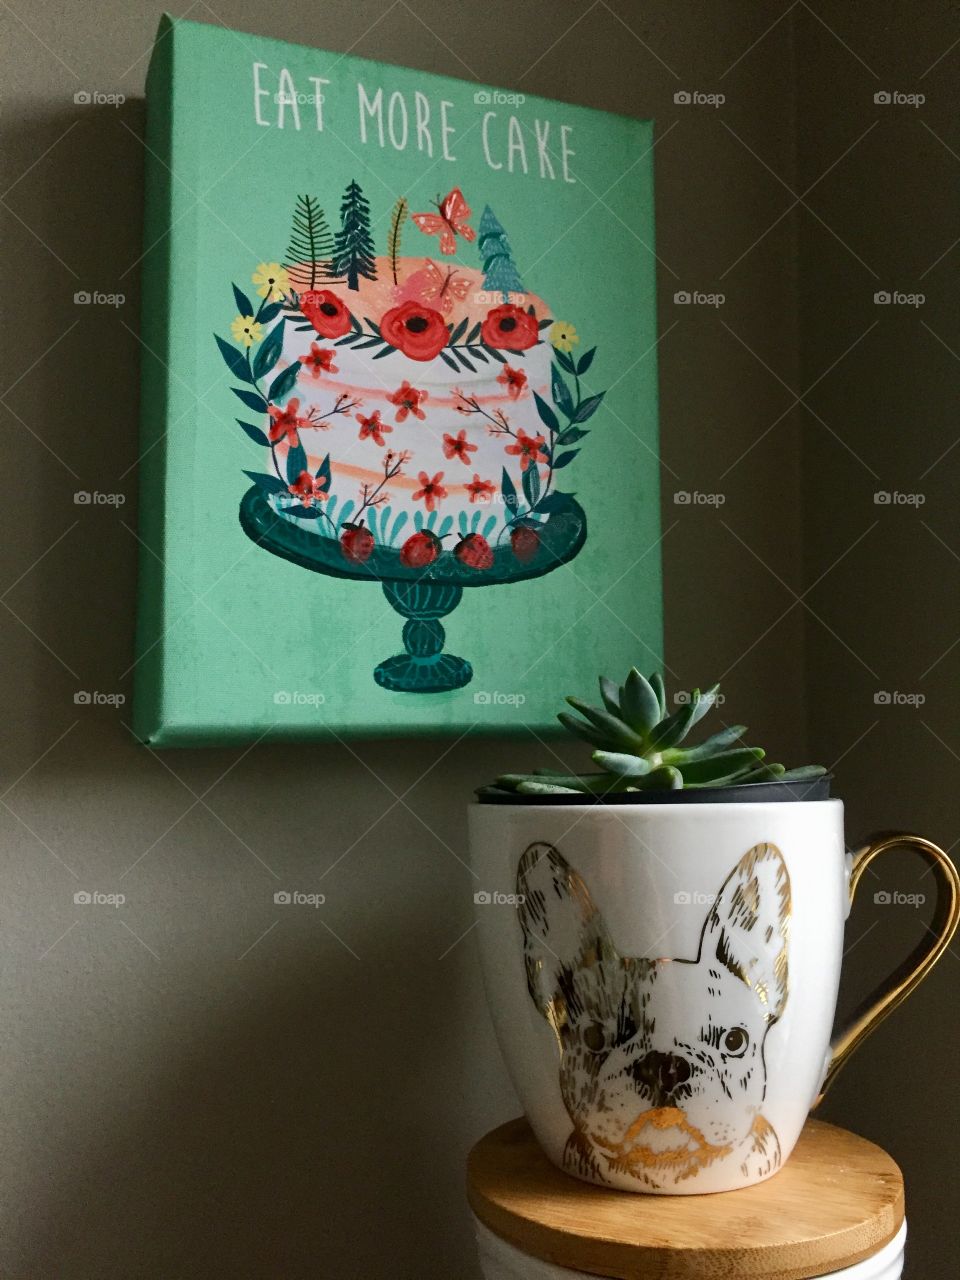 Succulent plant in French bulldog mug with painting “Eat More Cake” behind it